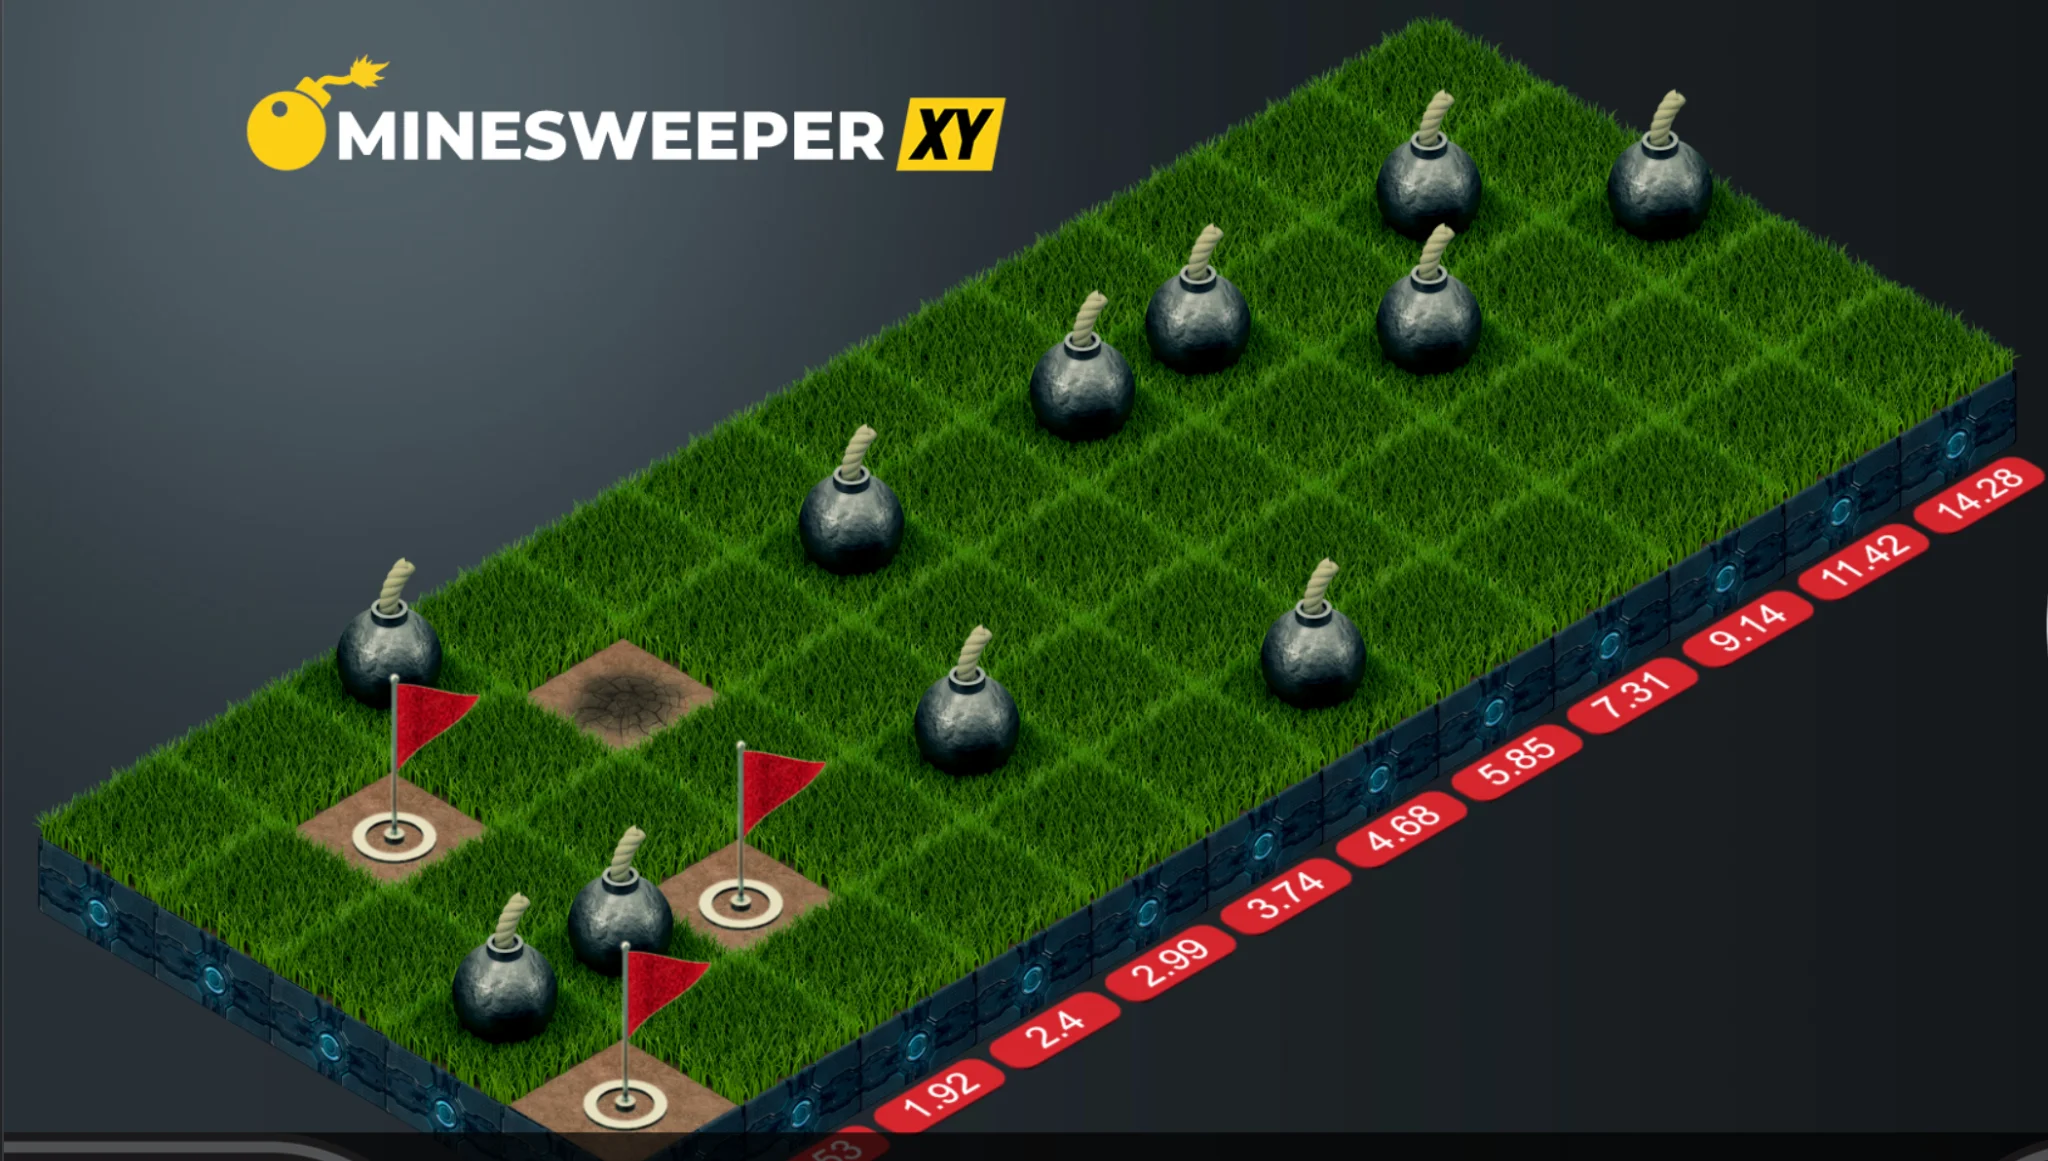 Minesweeper XY spill online